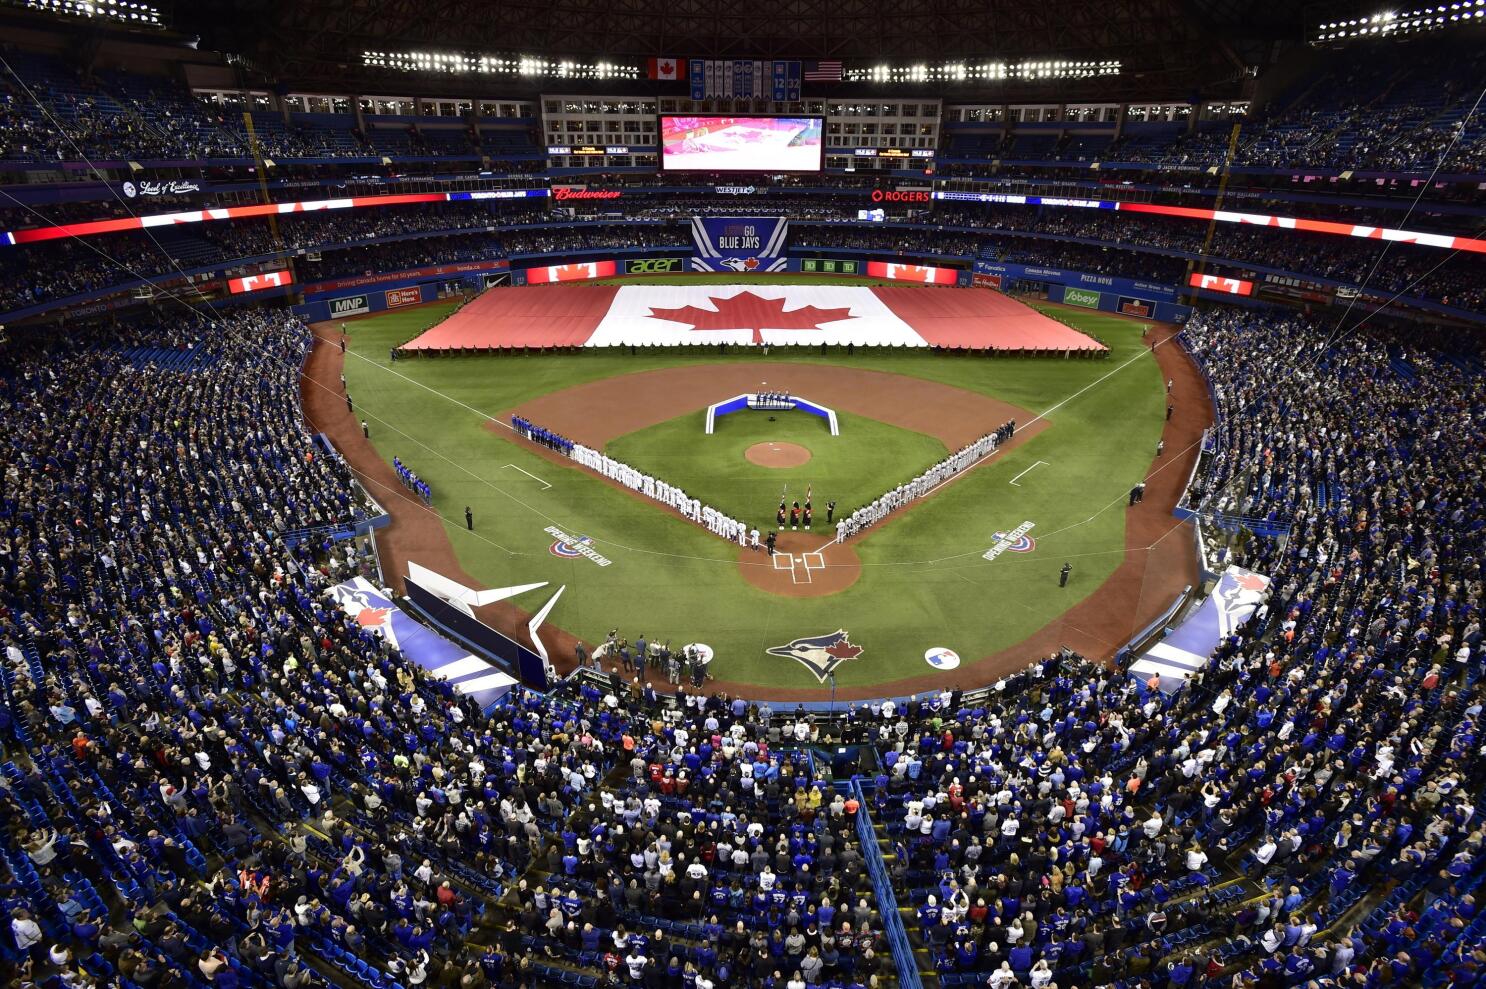 Blue Jays get approval to return to Canada on July 30